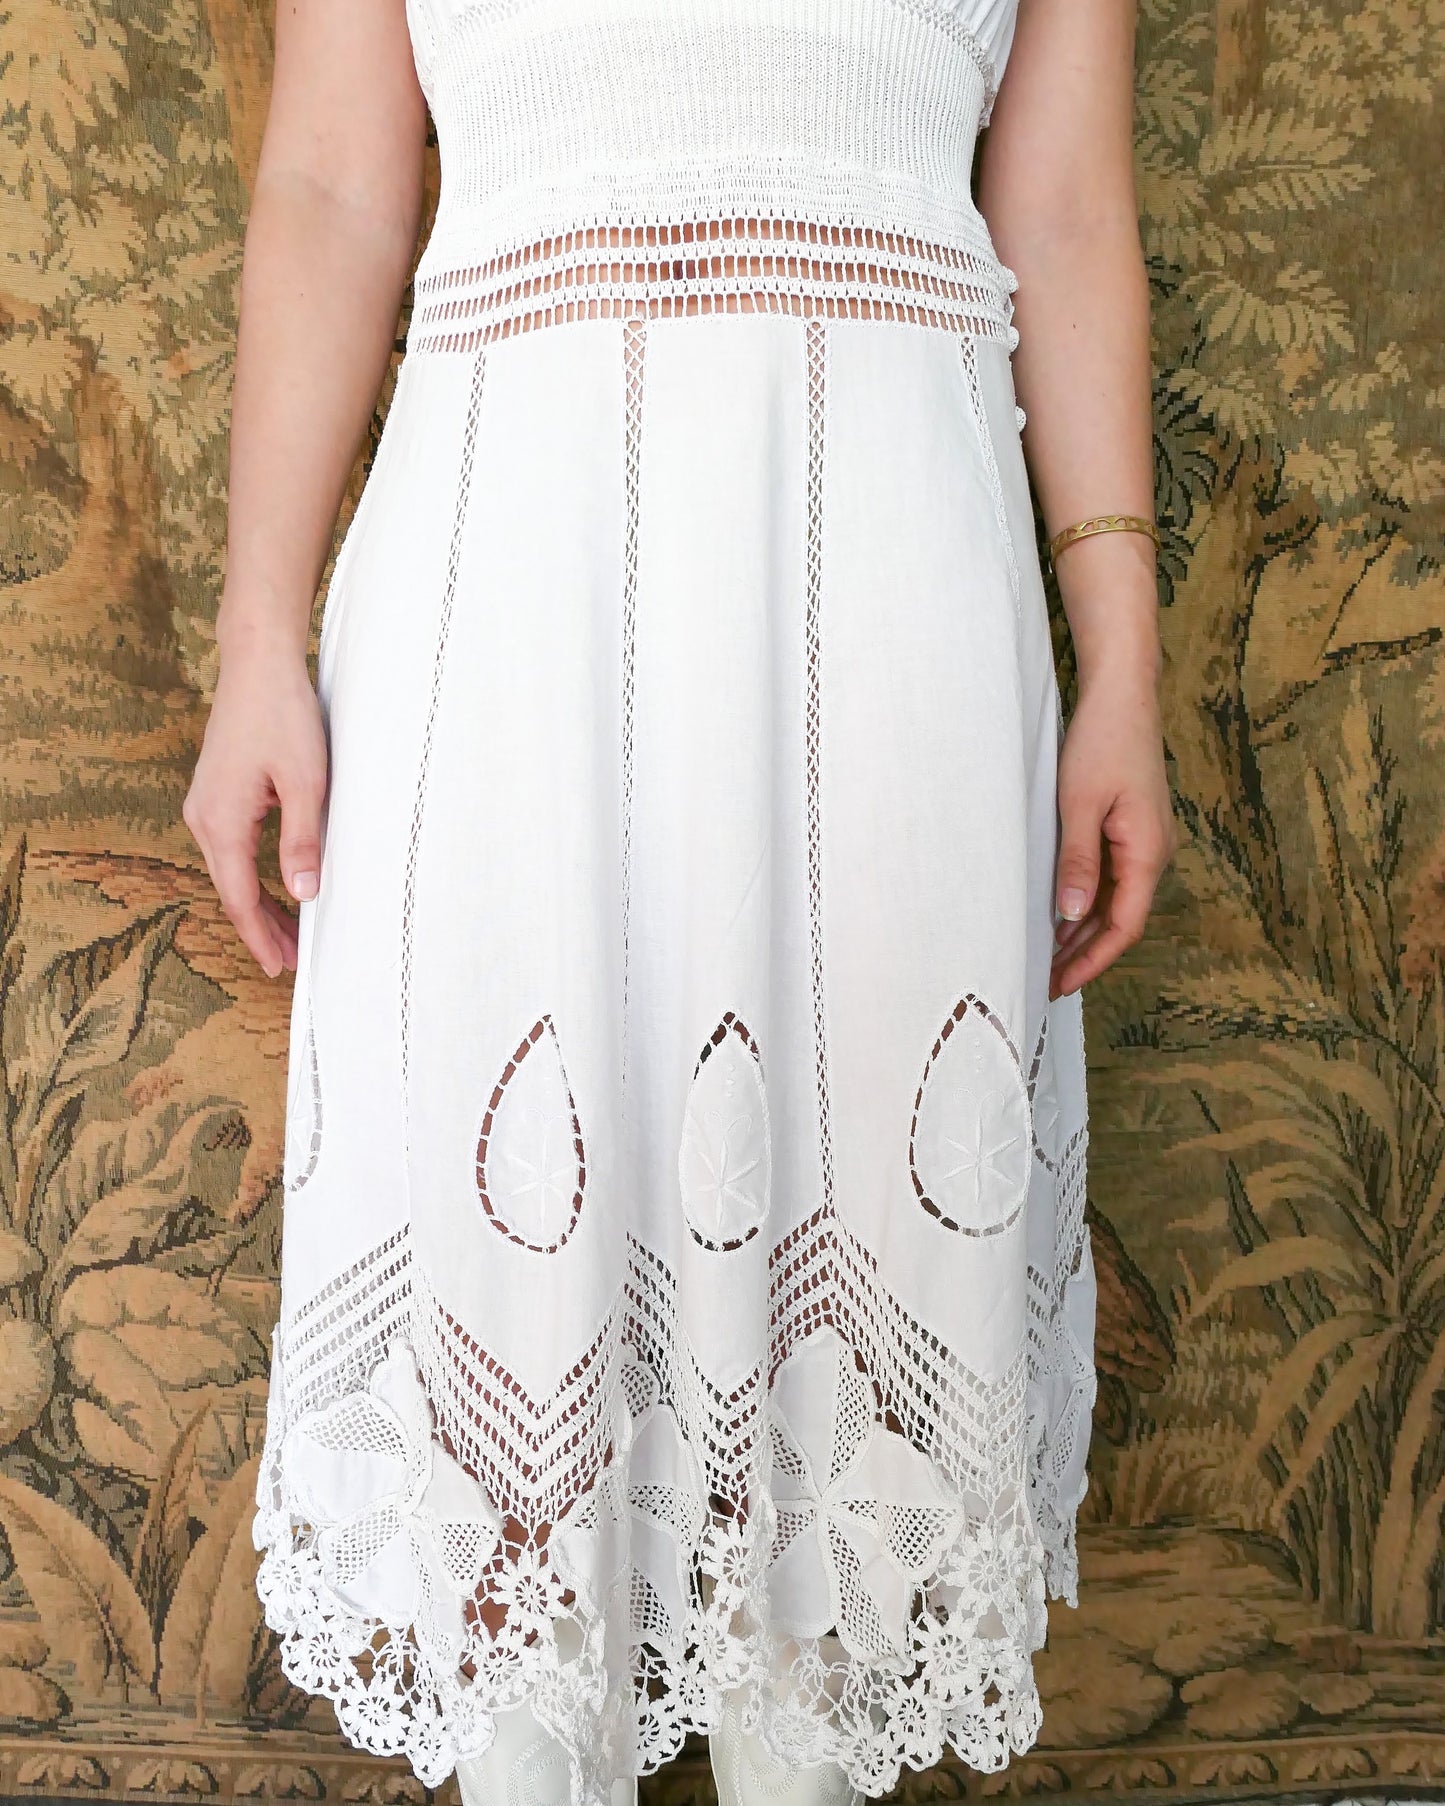 A white cotton midi dress with whimsical crochet and embroidered flowers at the hem and collar, and teardrop shaped eyelet detail on the skirt. Stretchable ribbed knit fabric around the waist adds contour to the dress. By Lim's Vintage